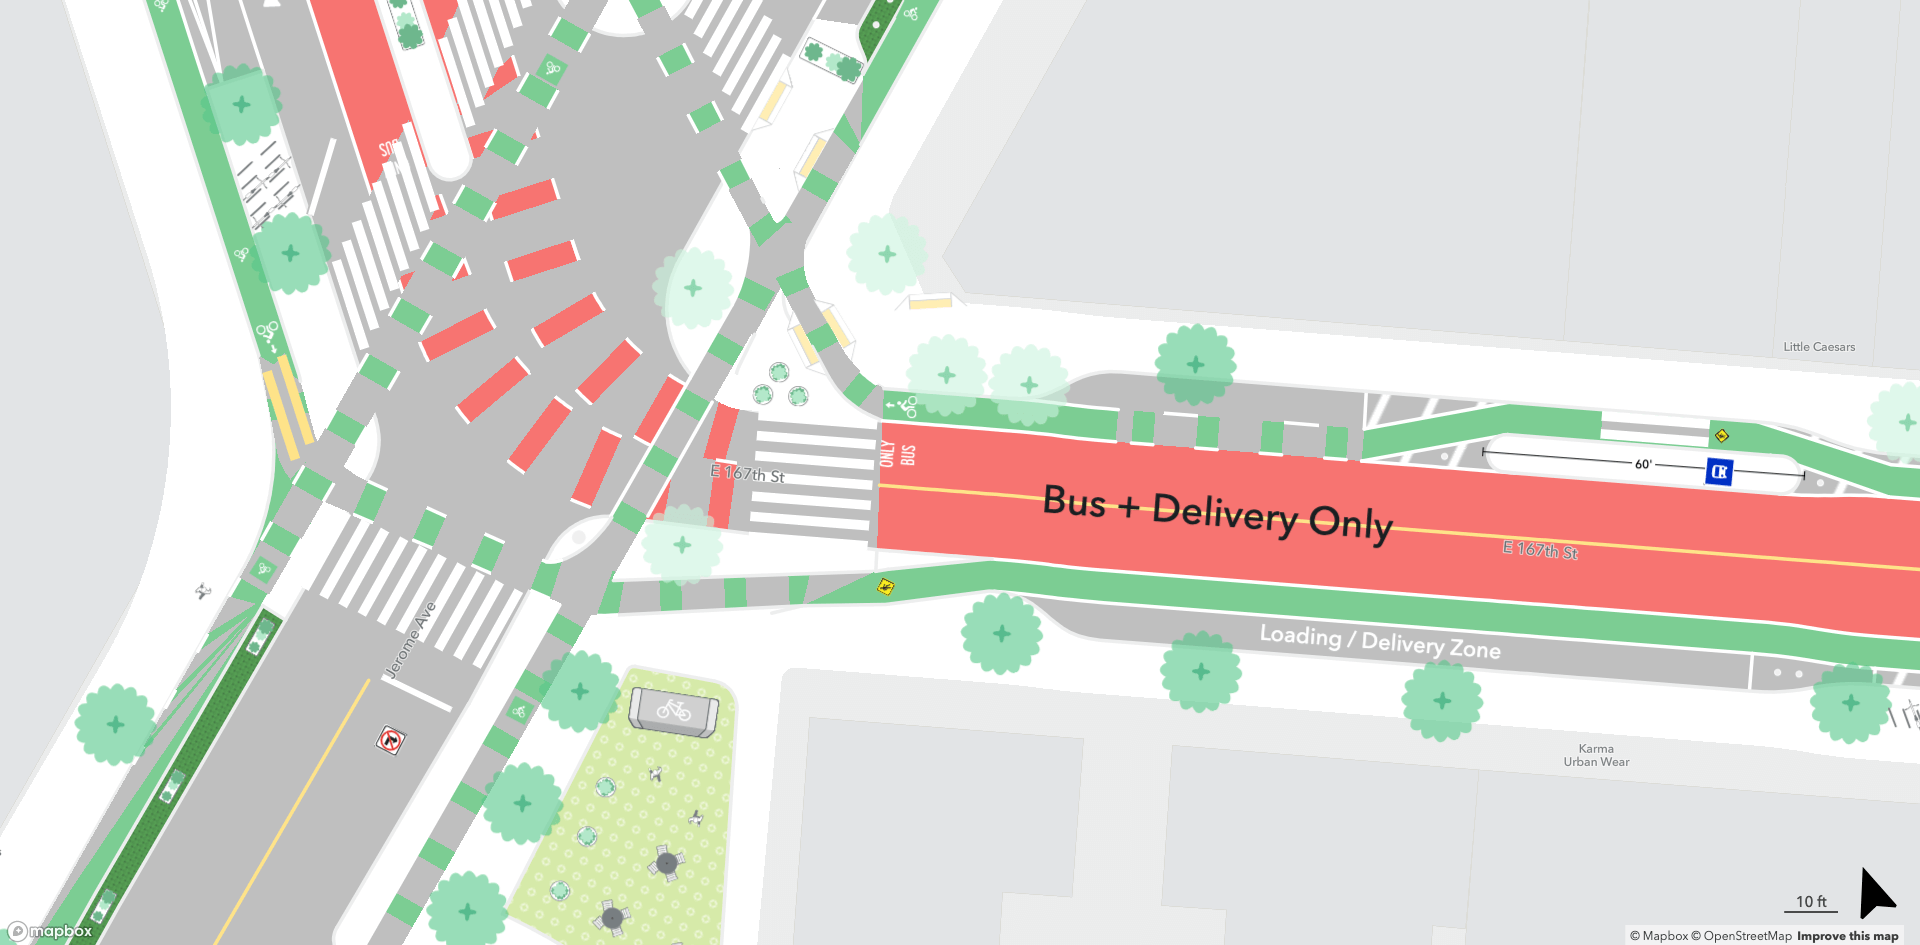 rendering of a road for buses and deliveries only